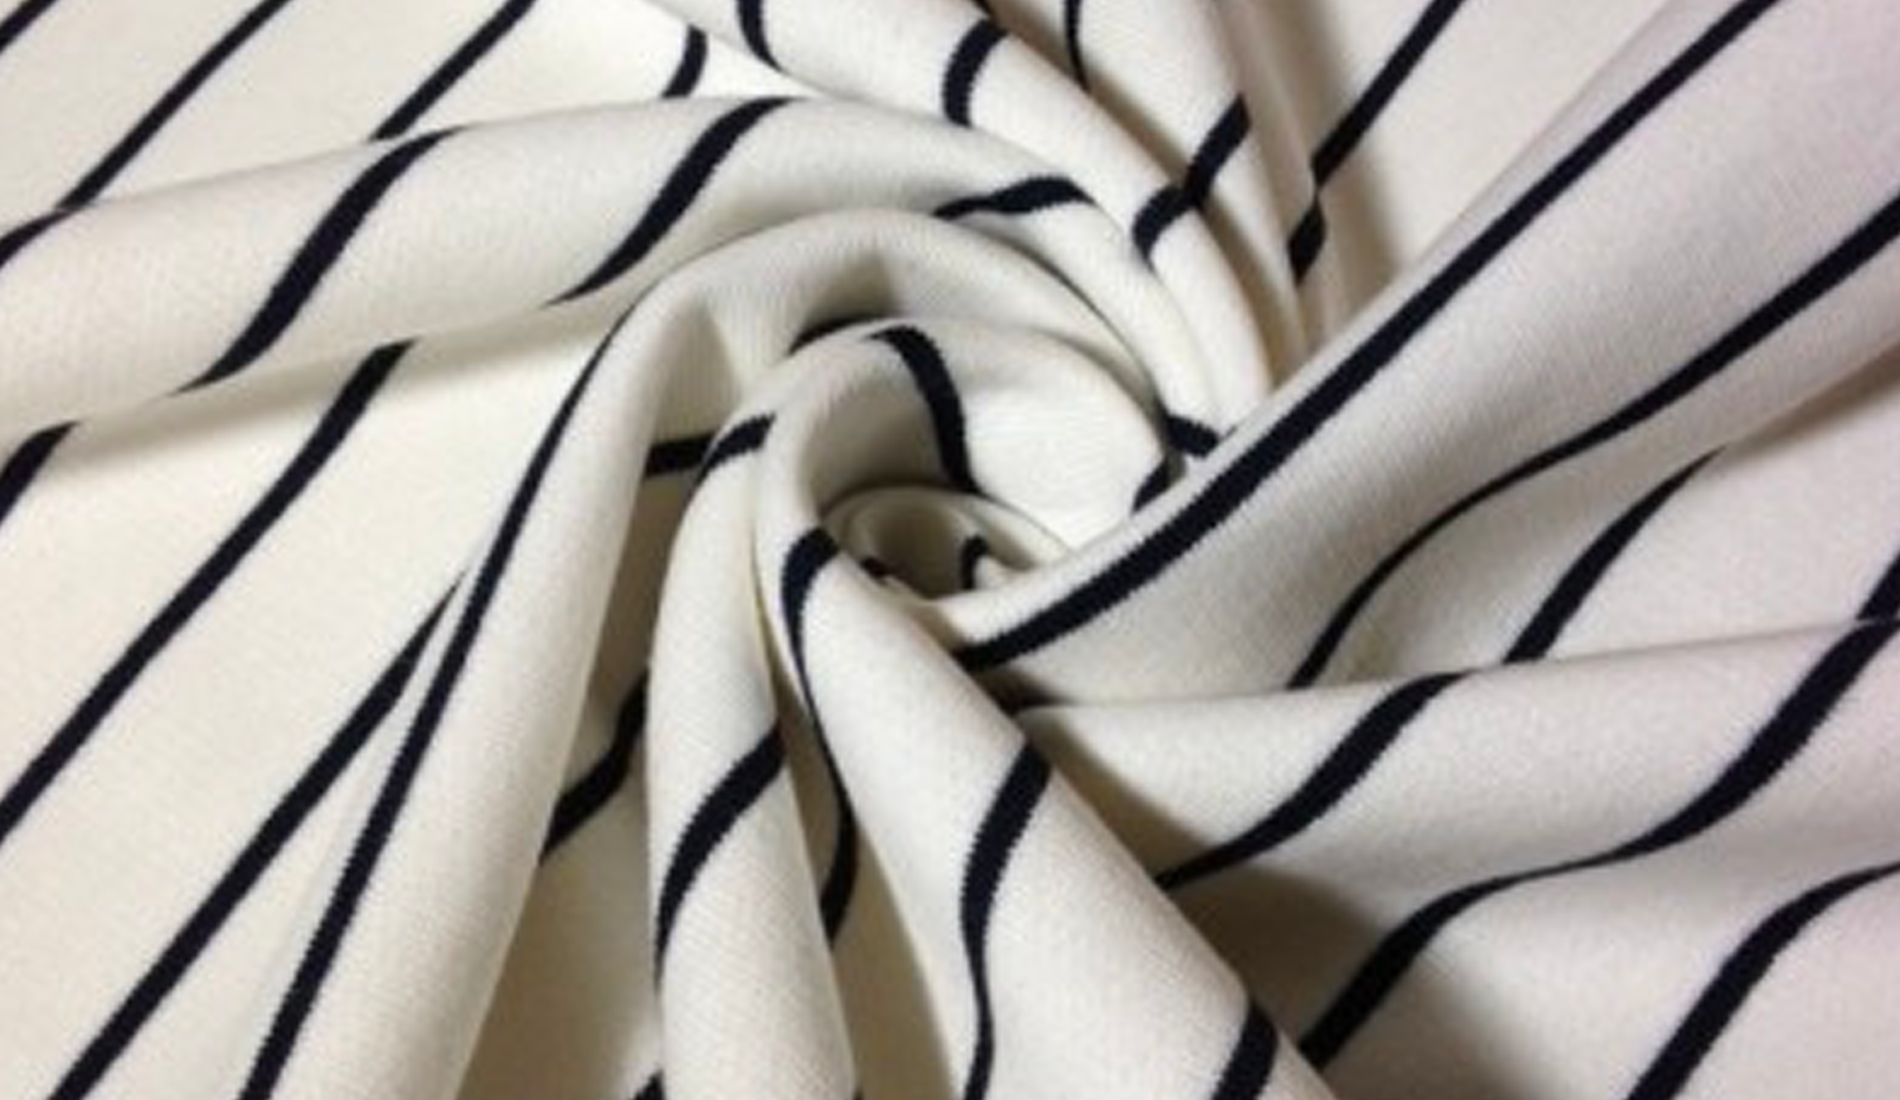 Wholesale hosiery cotton fabric For Reuse And Sustainable Fashion